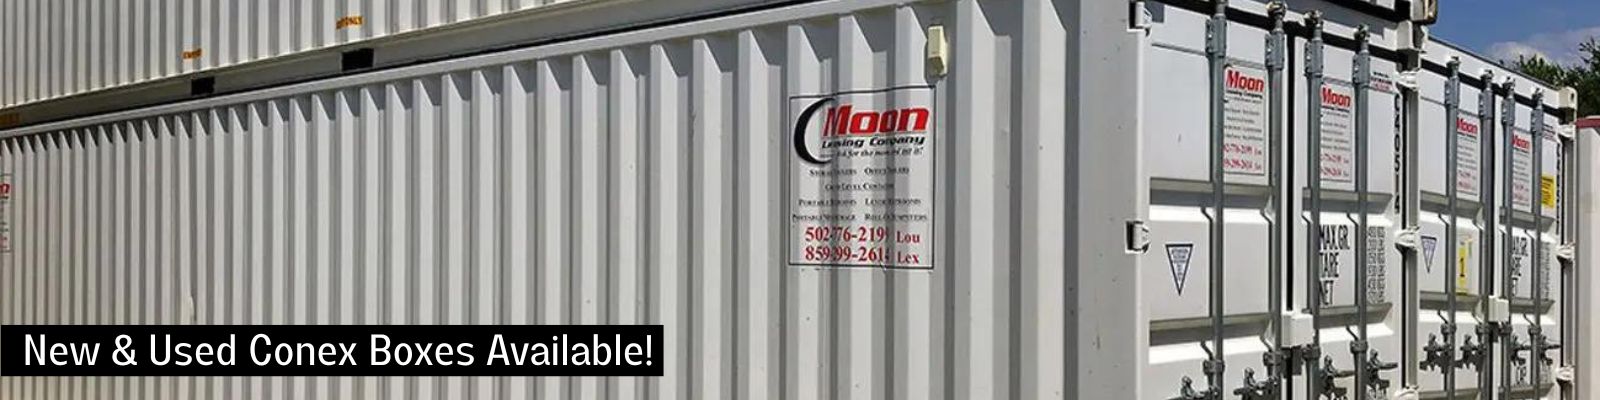 Moon Trailer Leasing New and Used Conex Boxes Available!